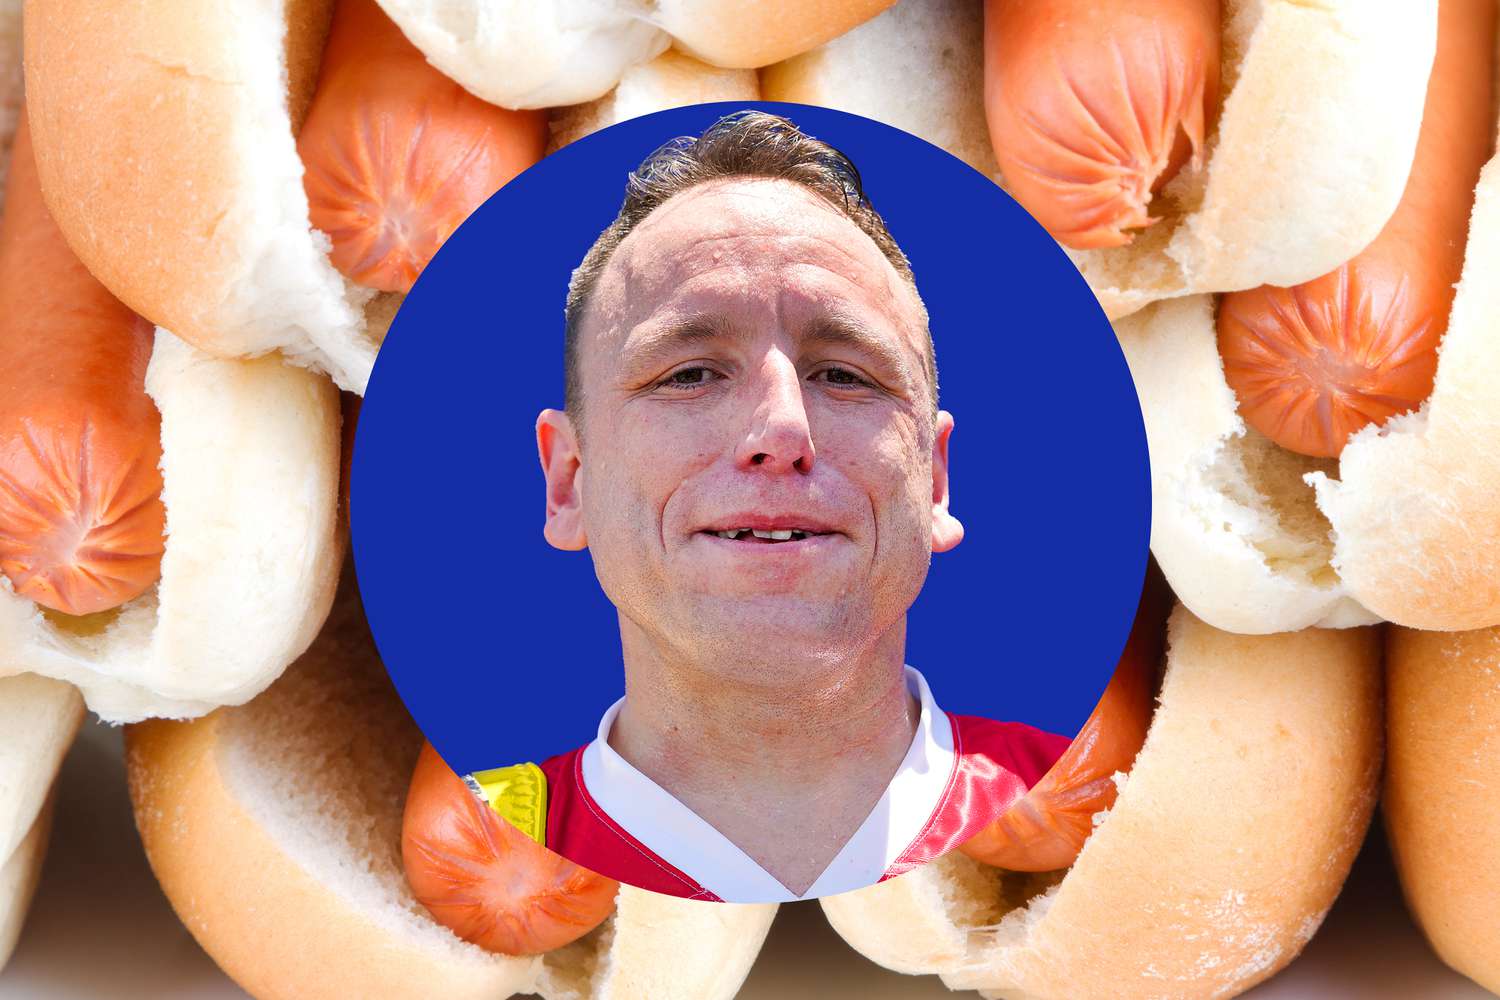 Joey Chestnut Is Banned From the 4th of July Nathans Famous Hot Dog Eating Contest [Video]